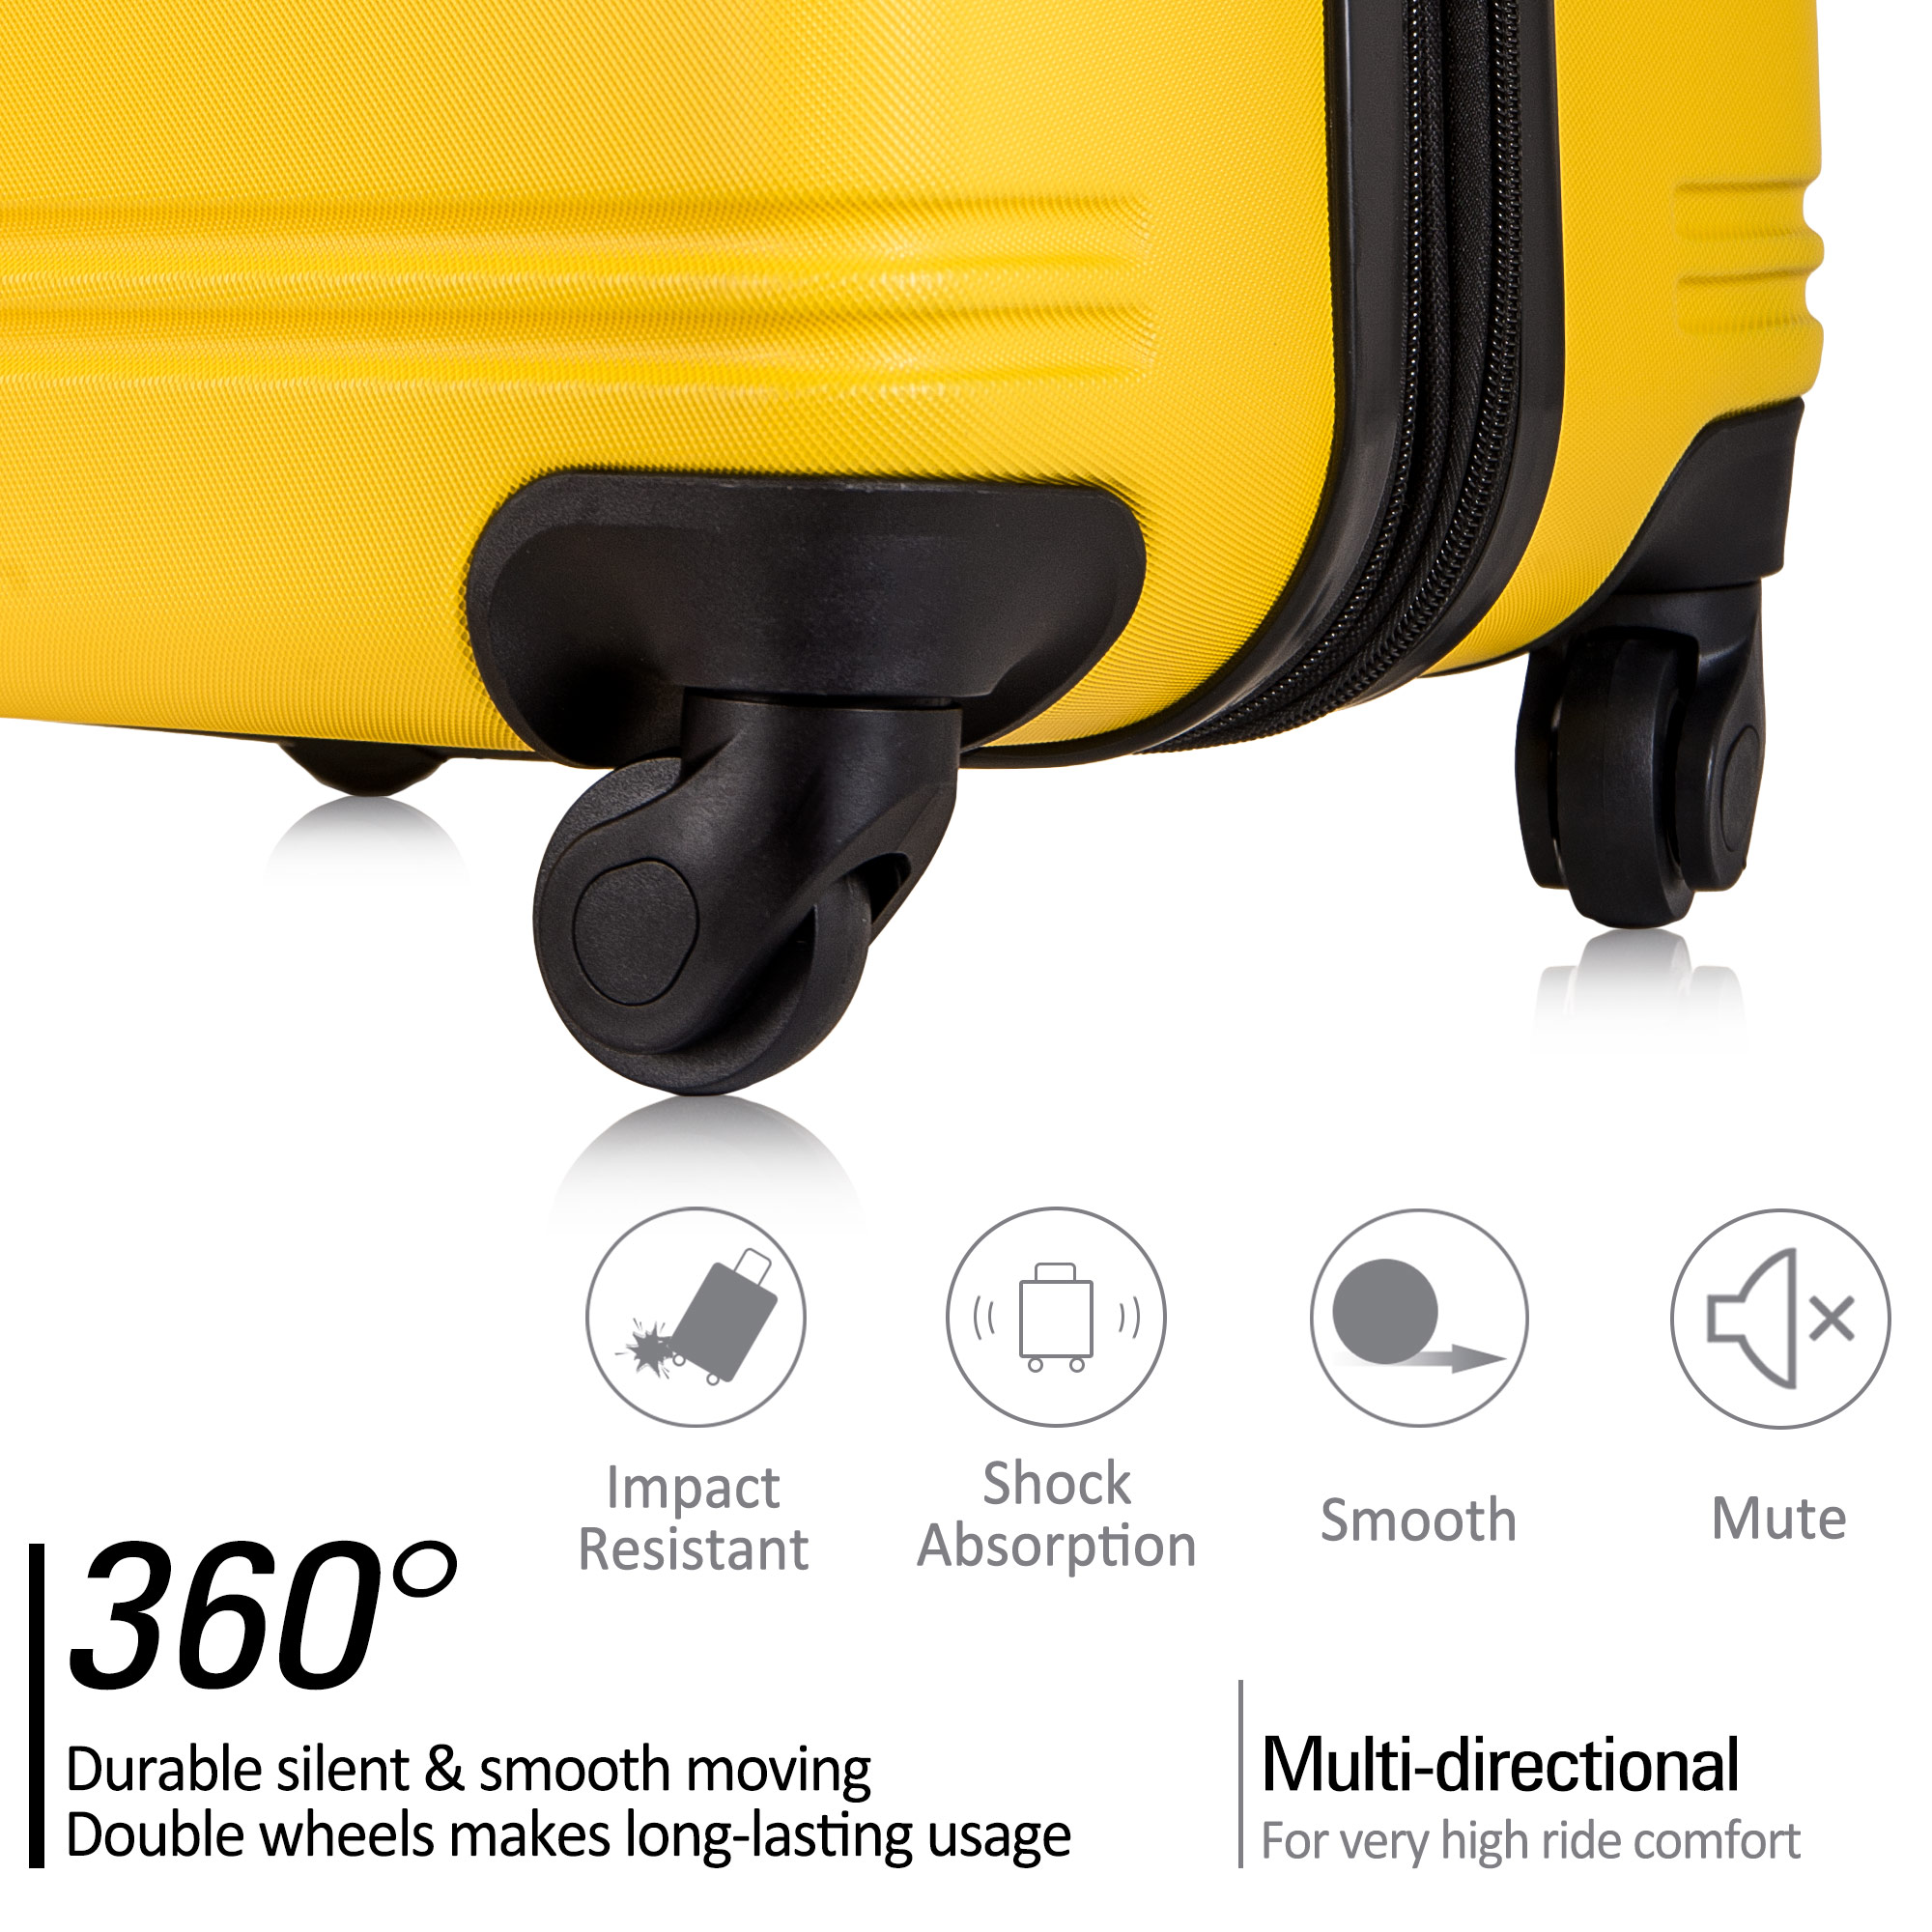 VERAGE 20/24/28 in. Yellow Luggage Sets with Spinner Wheels, Expandable  3-Piece Luggage Sets, Travel Suitcase Set TSA Approved GM20062W  II-20-24-28-Yellow - The Home Depot